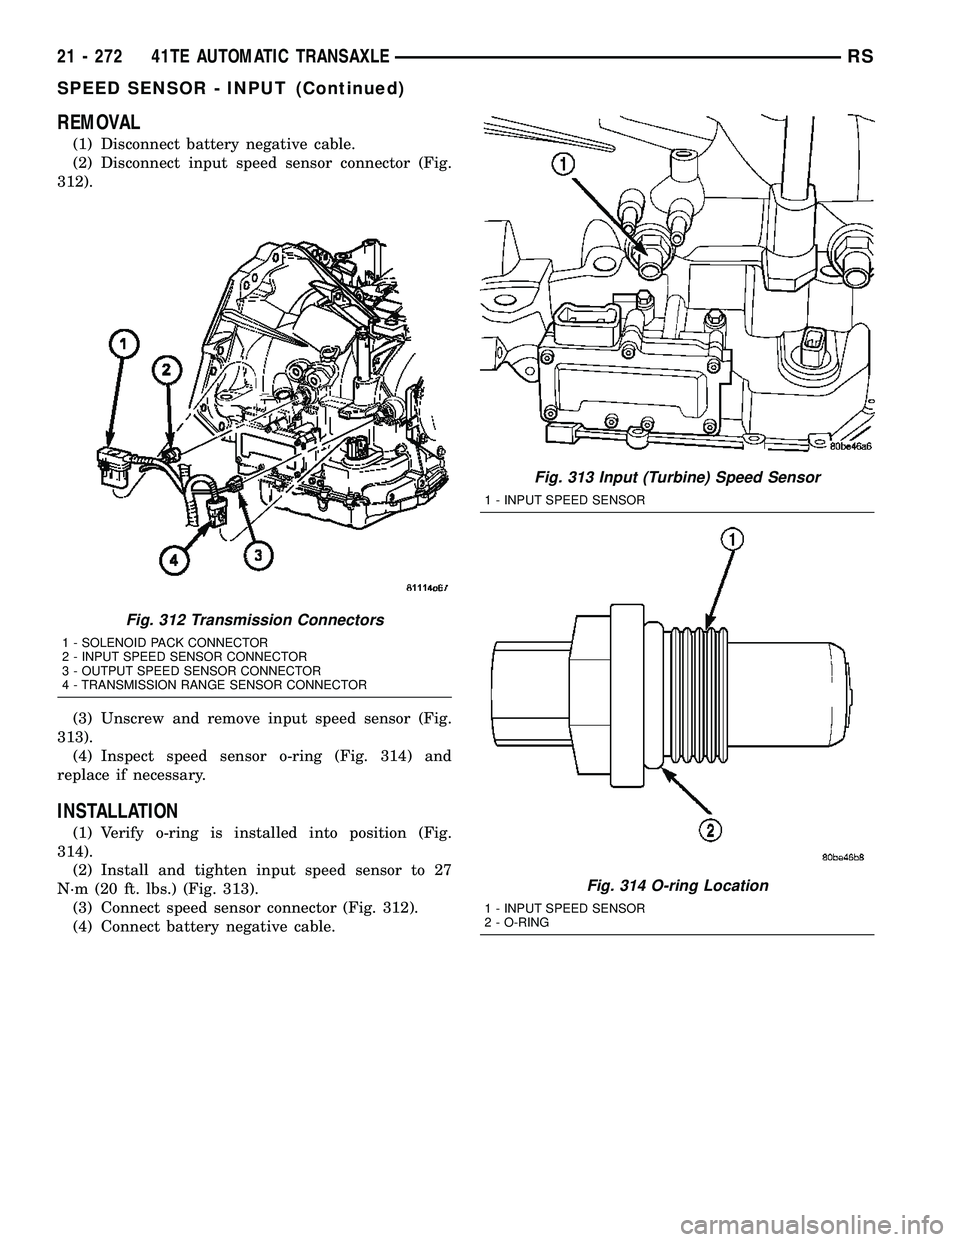 CHRYSLER VOYAGER 2005  Service Manual REMOVAL
(1) Disconnect battery negative cable.
(2) Disconnect input speed sensor connector (Fig.
312).
(3) Unscrew and remove input speed sensor (Fig.
313).
(4) Inspect speed sensor o-ring (Fig. 314) 